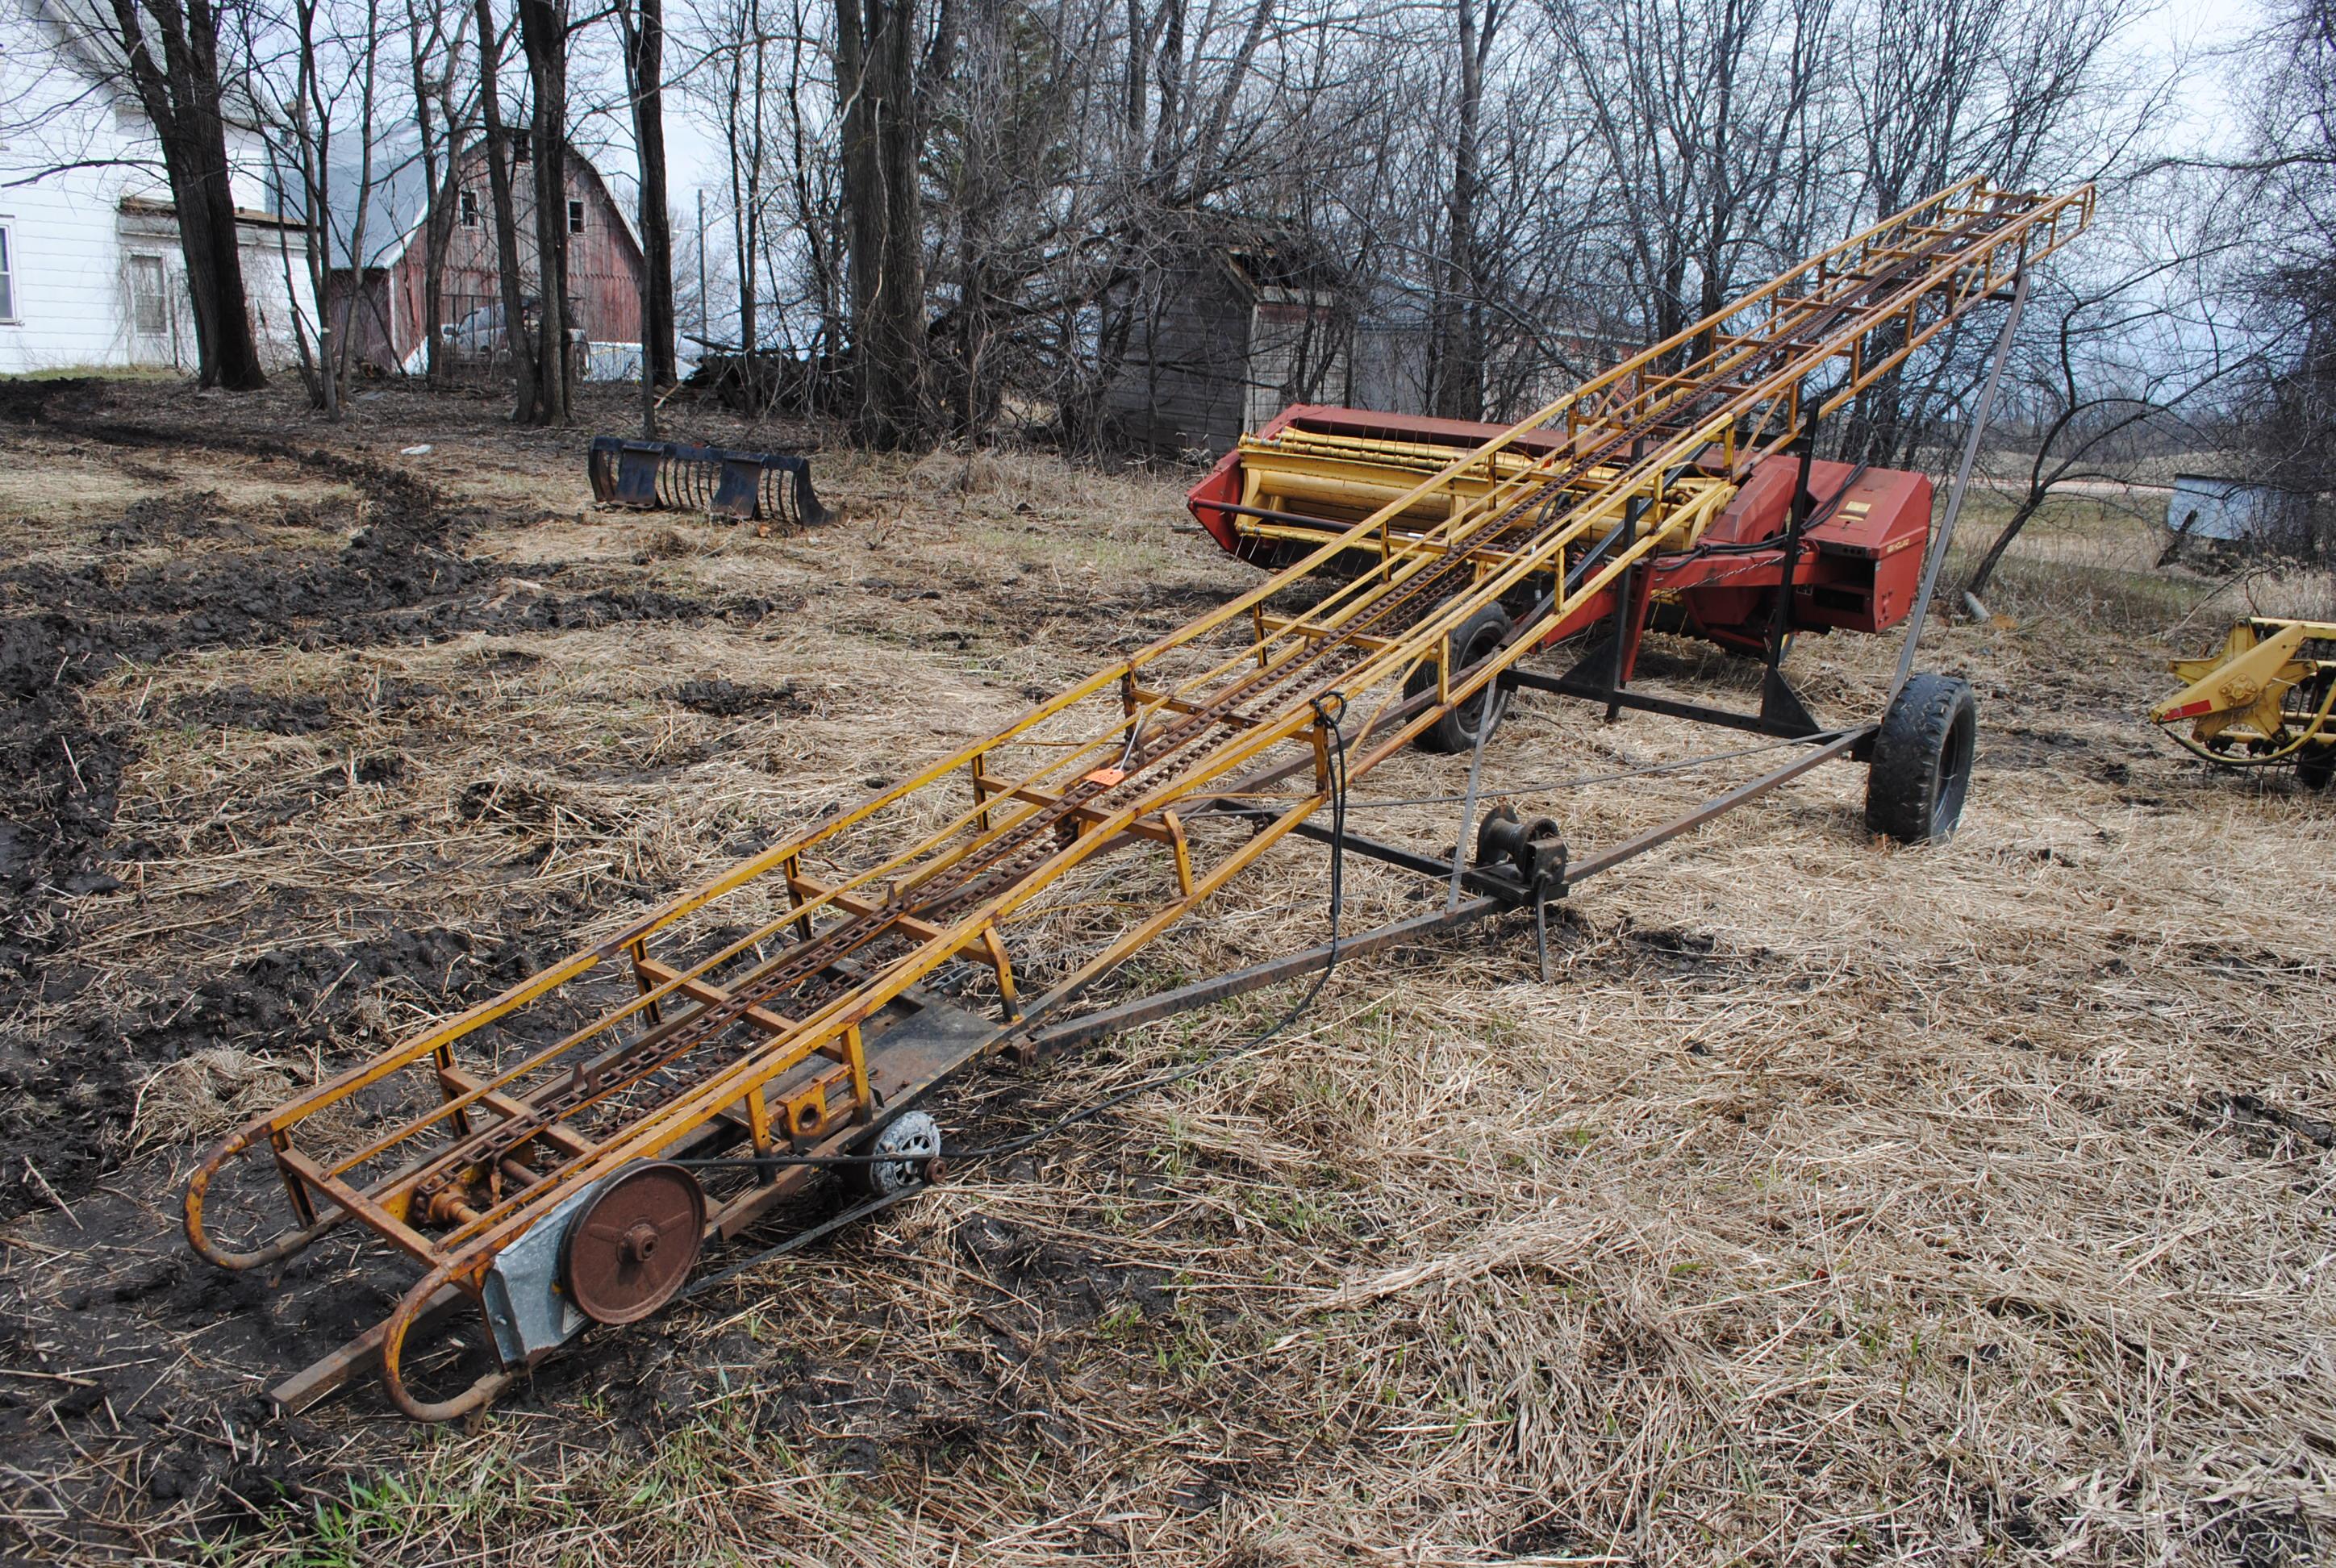 30' +/- Hay Elevator on transport with electric motor, slight bend